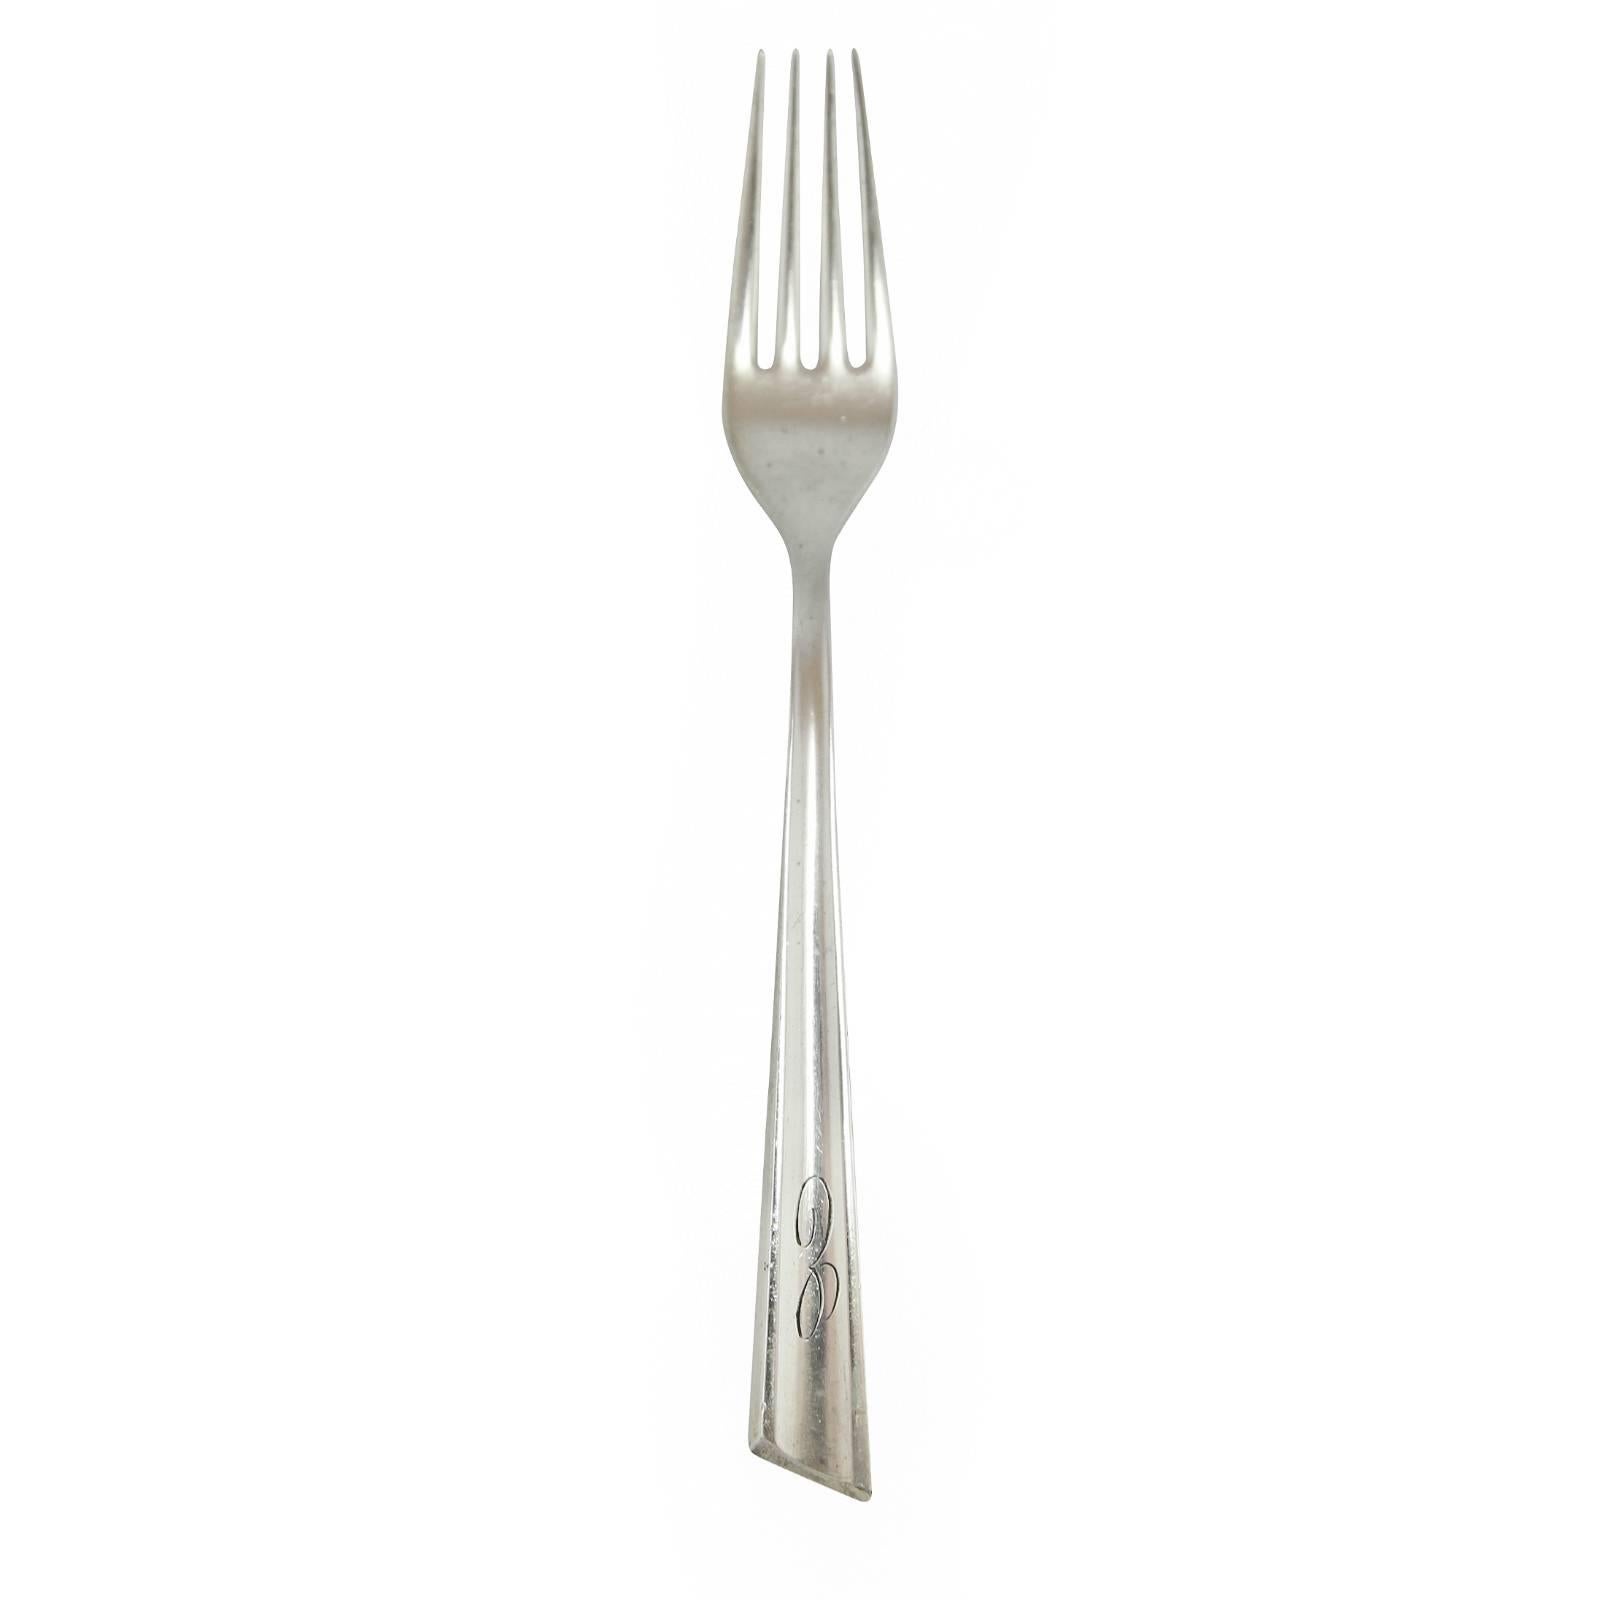 A sterling silver flatware set by Stieff in the ‘Personna’ patten. First produced in 1959, Personna embodies mid century design, and became one of Stieff’s best selling patterns. Stieff was soon purchased by Schofield Co in 1967, which was later